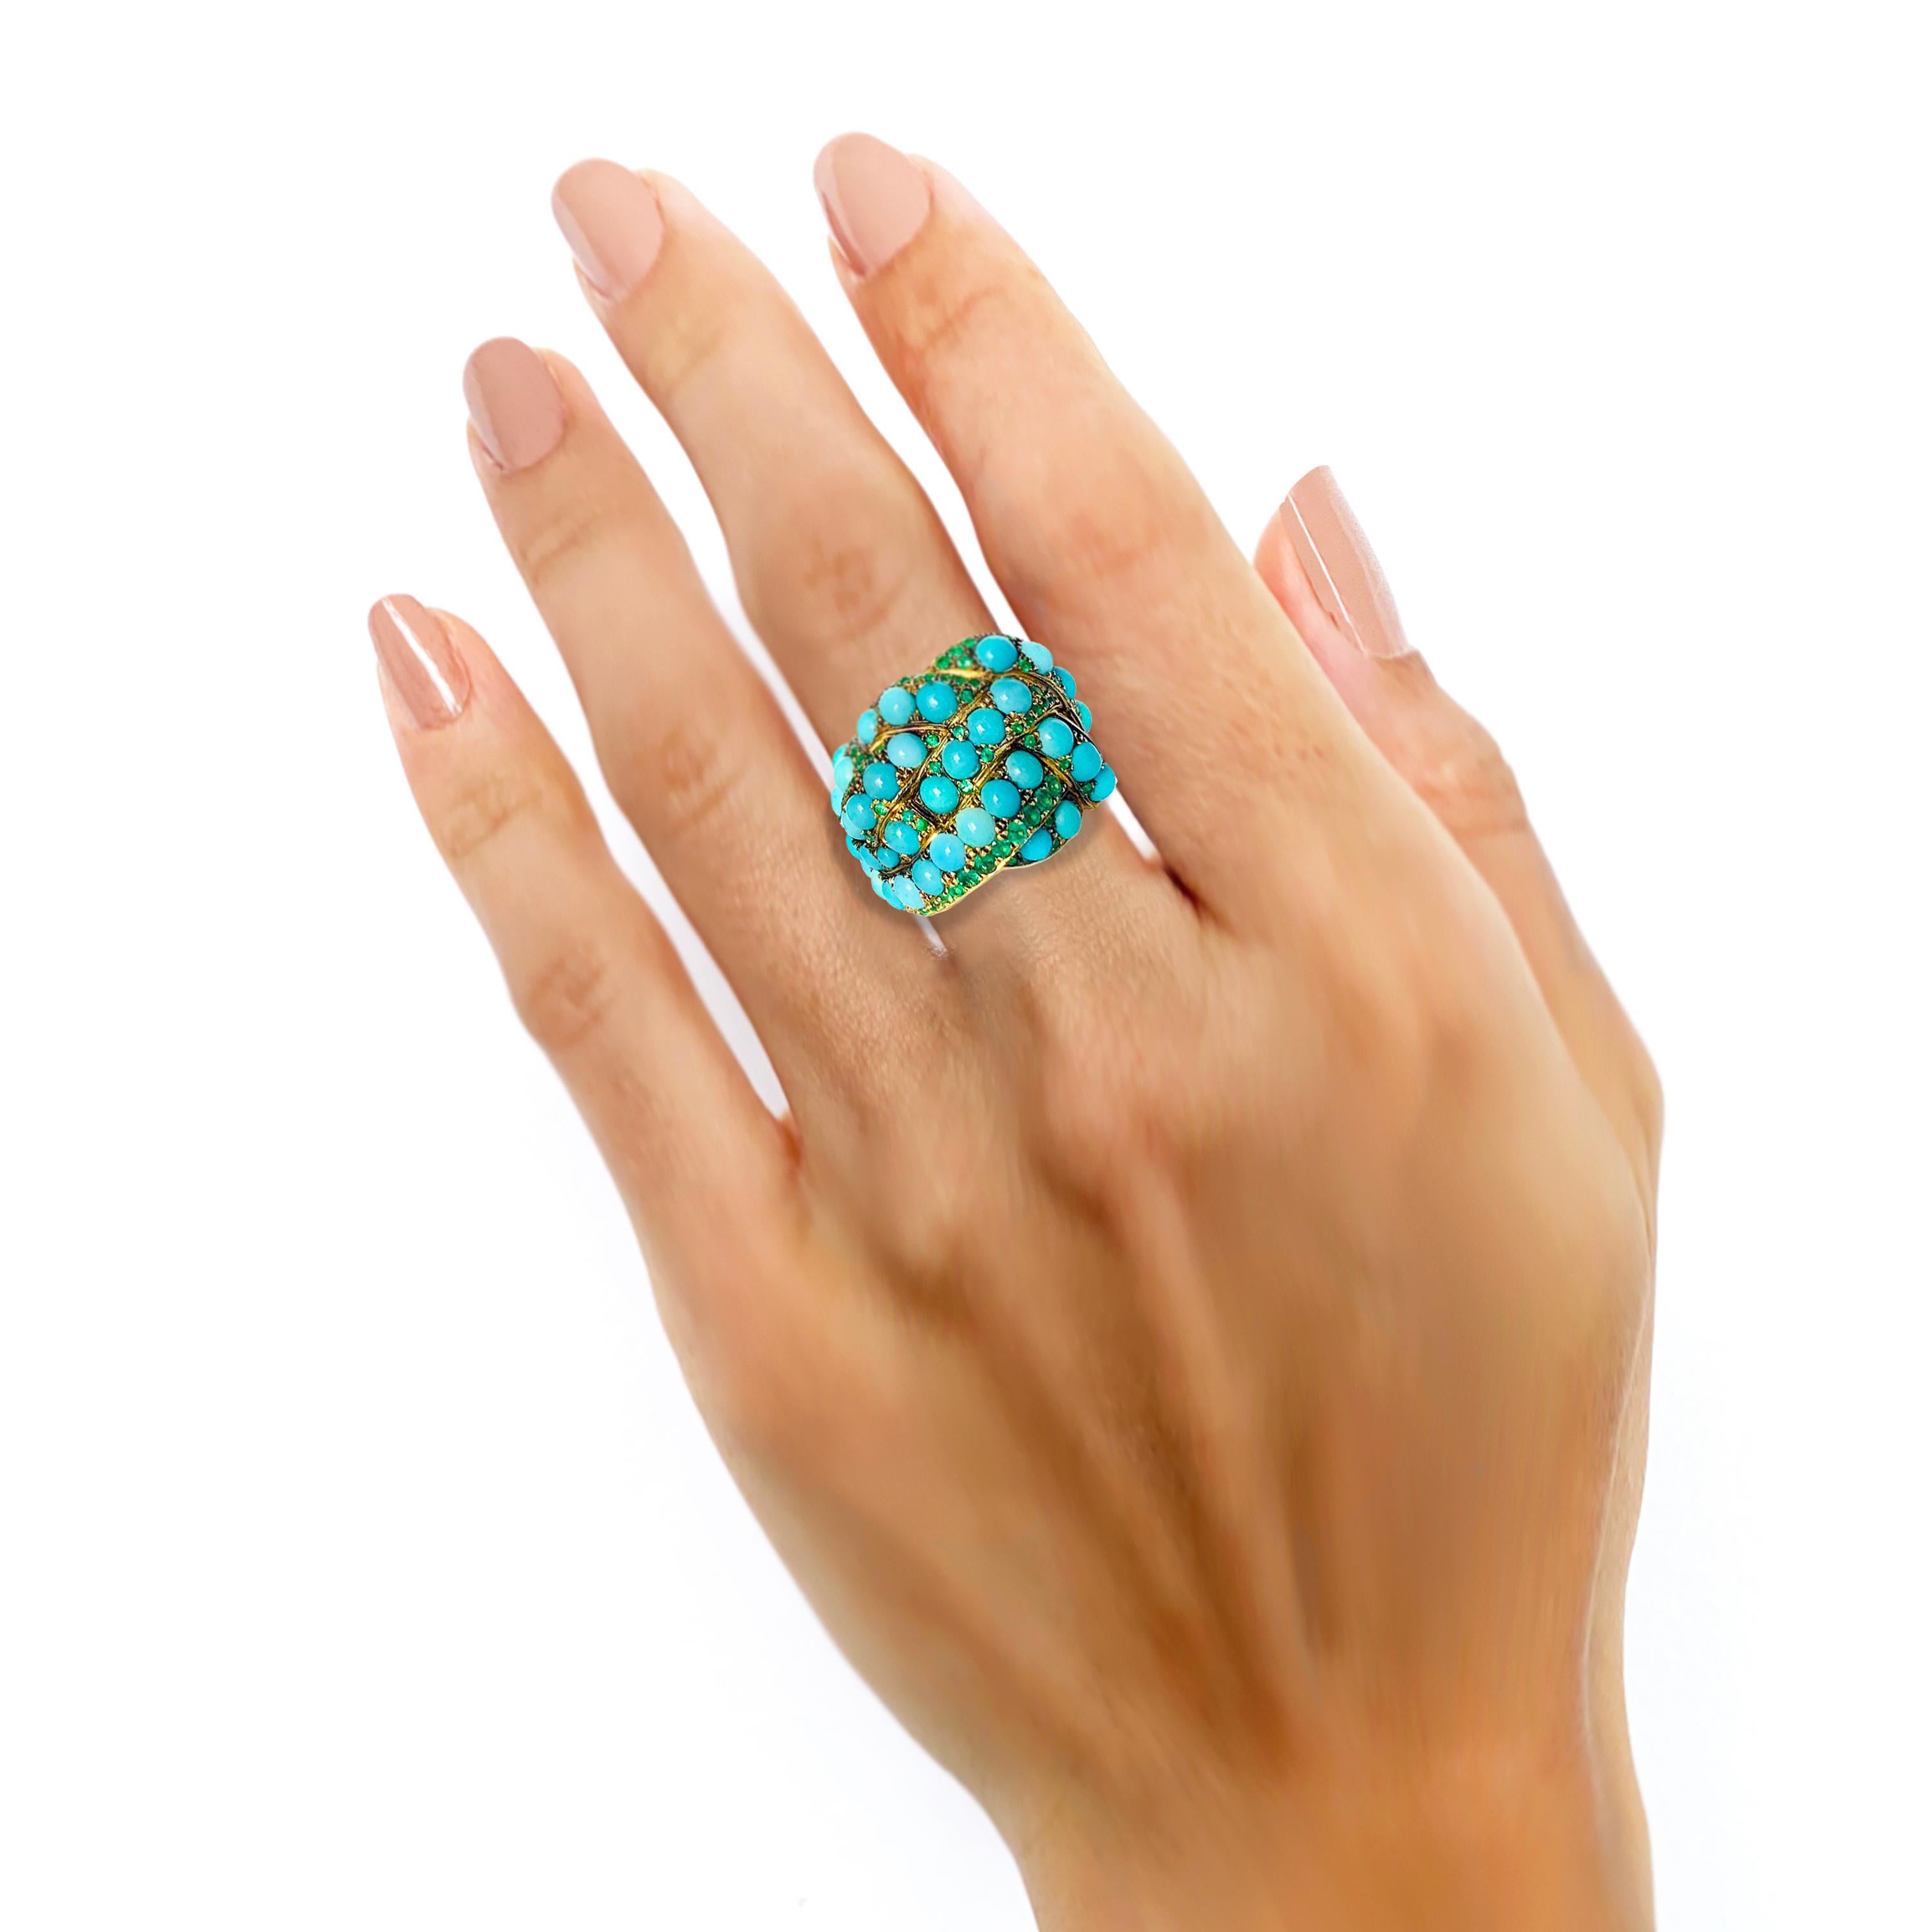 Rosior by Manuel Rosas 19.2k Yellow Gold Cocktail Ring, Hand Chiseled and set with:
- 49 Round Cabochon Turquoises with 9,57 ct;
- 97 Emeralds with 0,98 ct. 
Can be sized.
Black rhodium finnishing.
This unique piece comes with a Certificate of